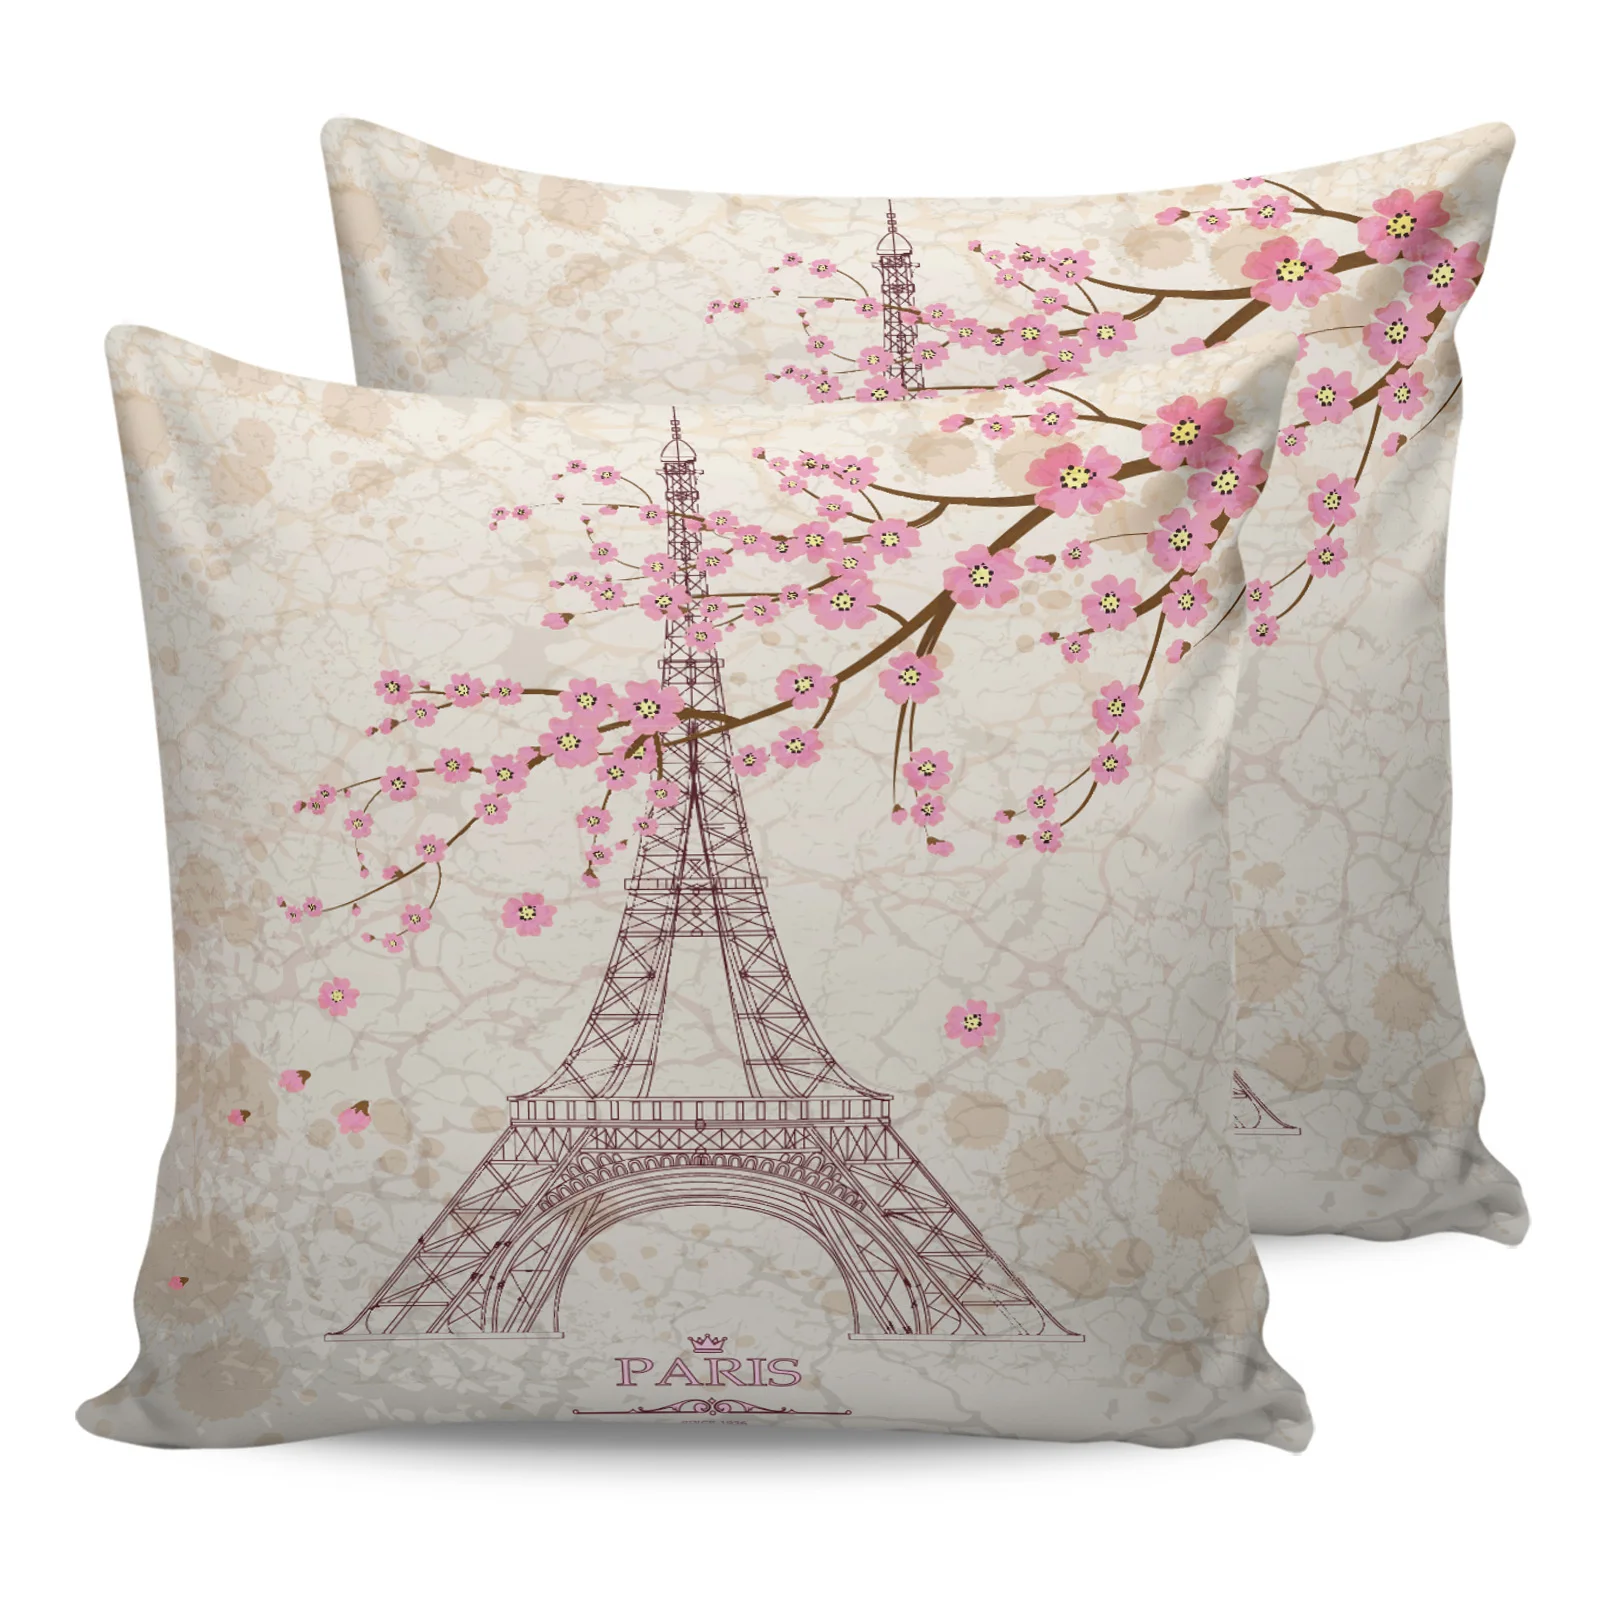 

2PCS Pillowcases Beautiful Cherry Blossom Paris Tower Cushion Cover Home Bedding Living Room Decorative Couch Throw Pillow Case